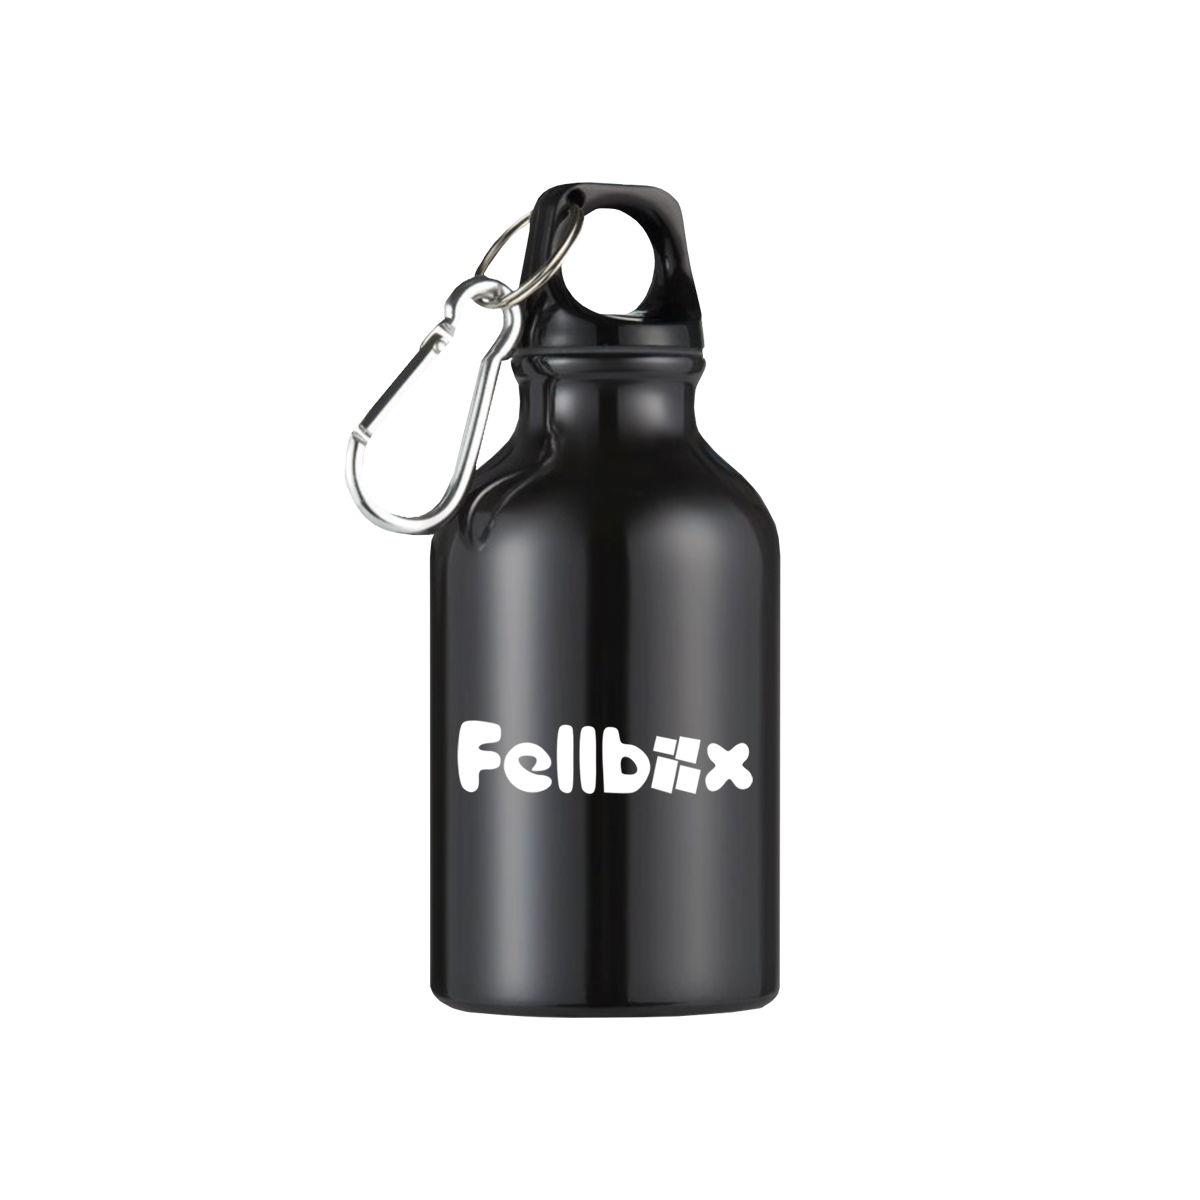 Fellbox Thermosflasche image